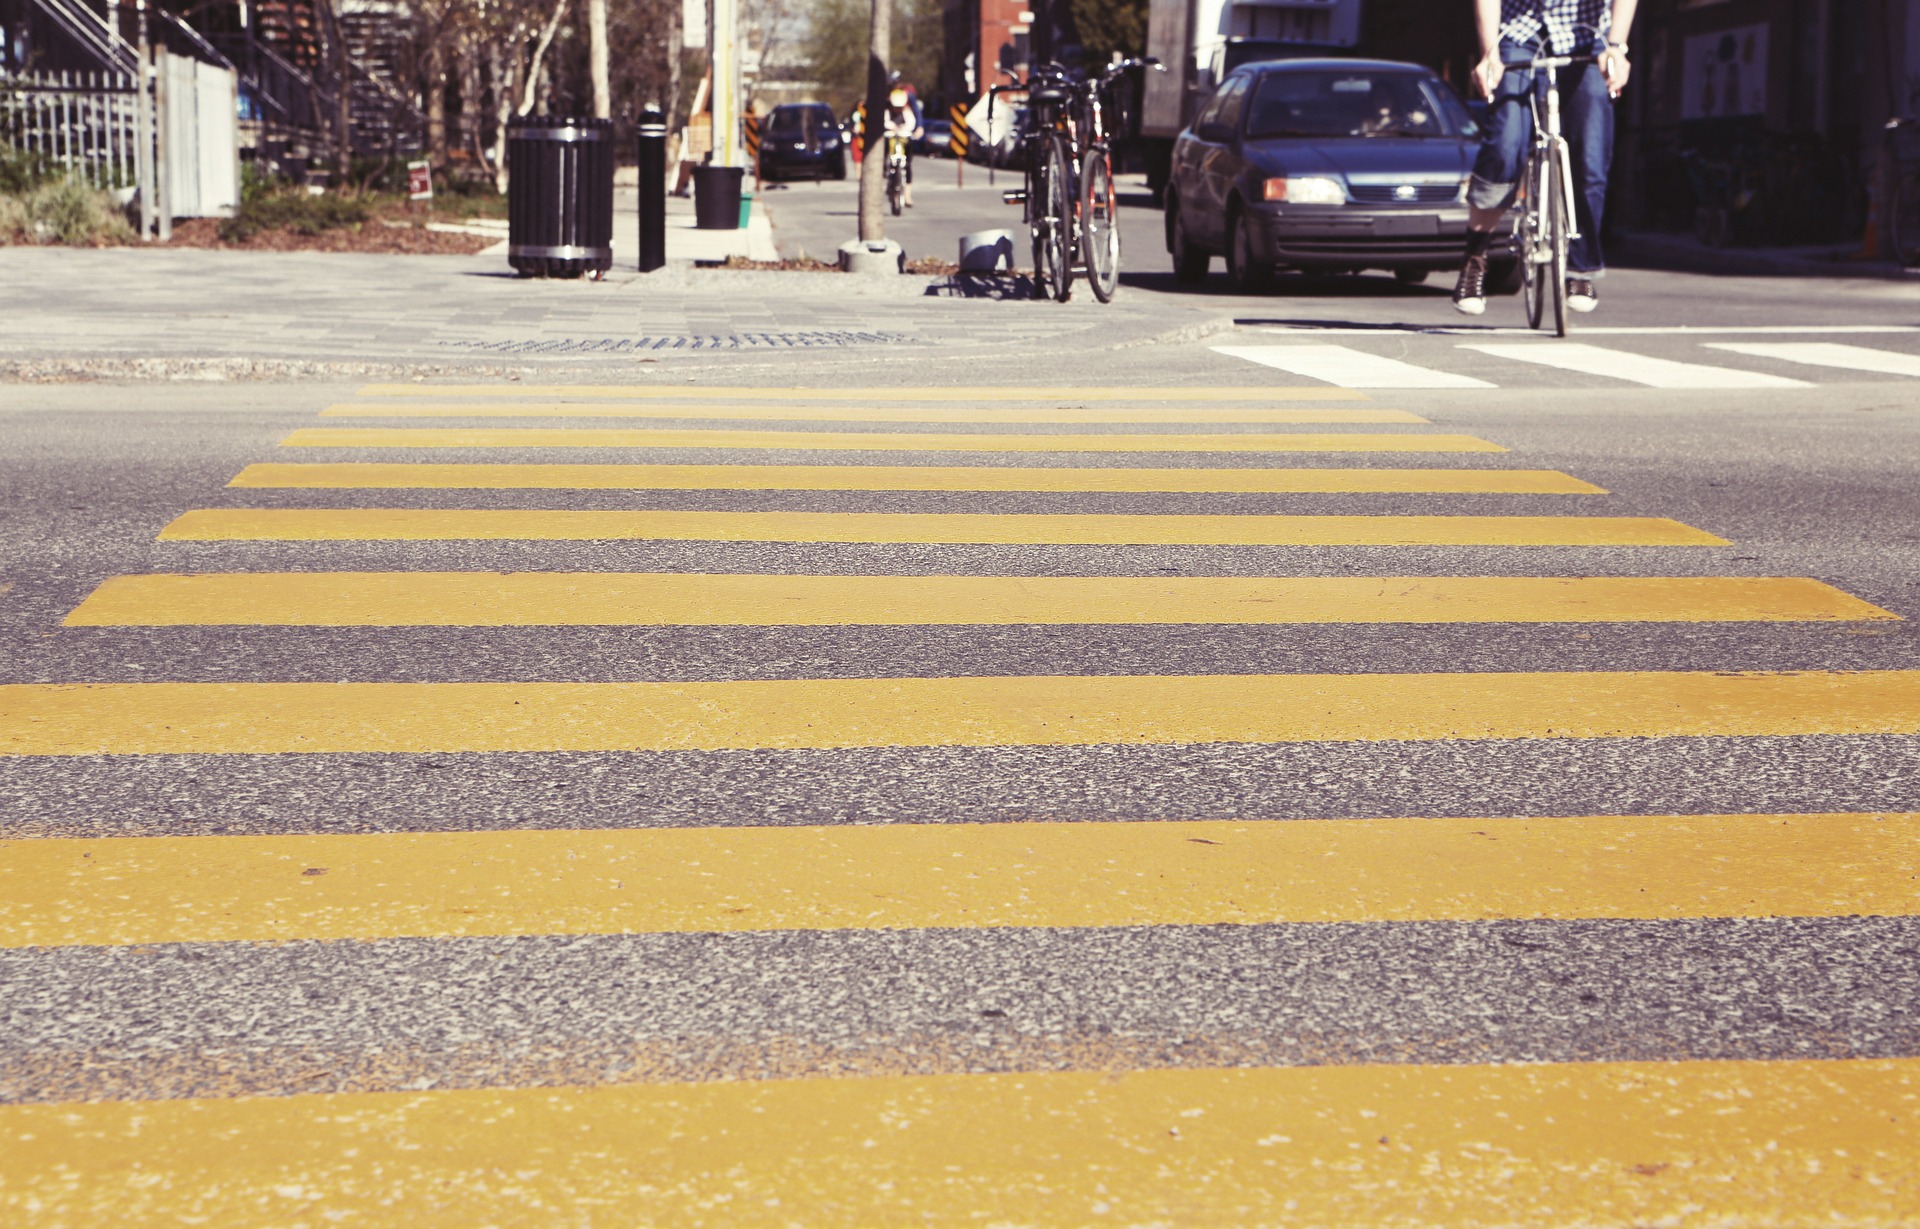 Pedestrian safety at intersections